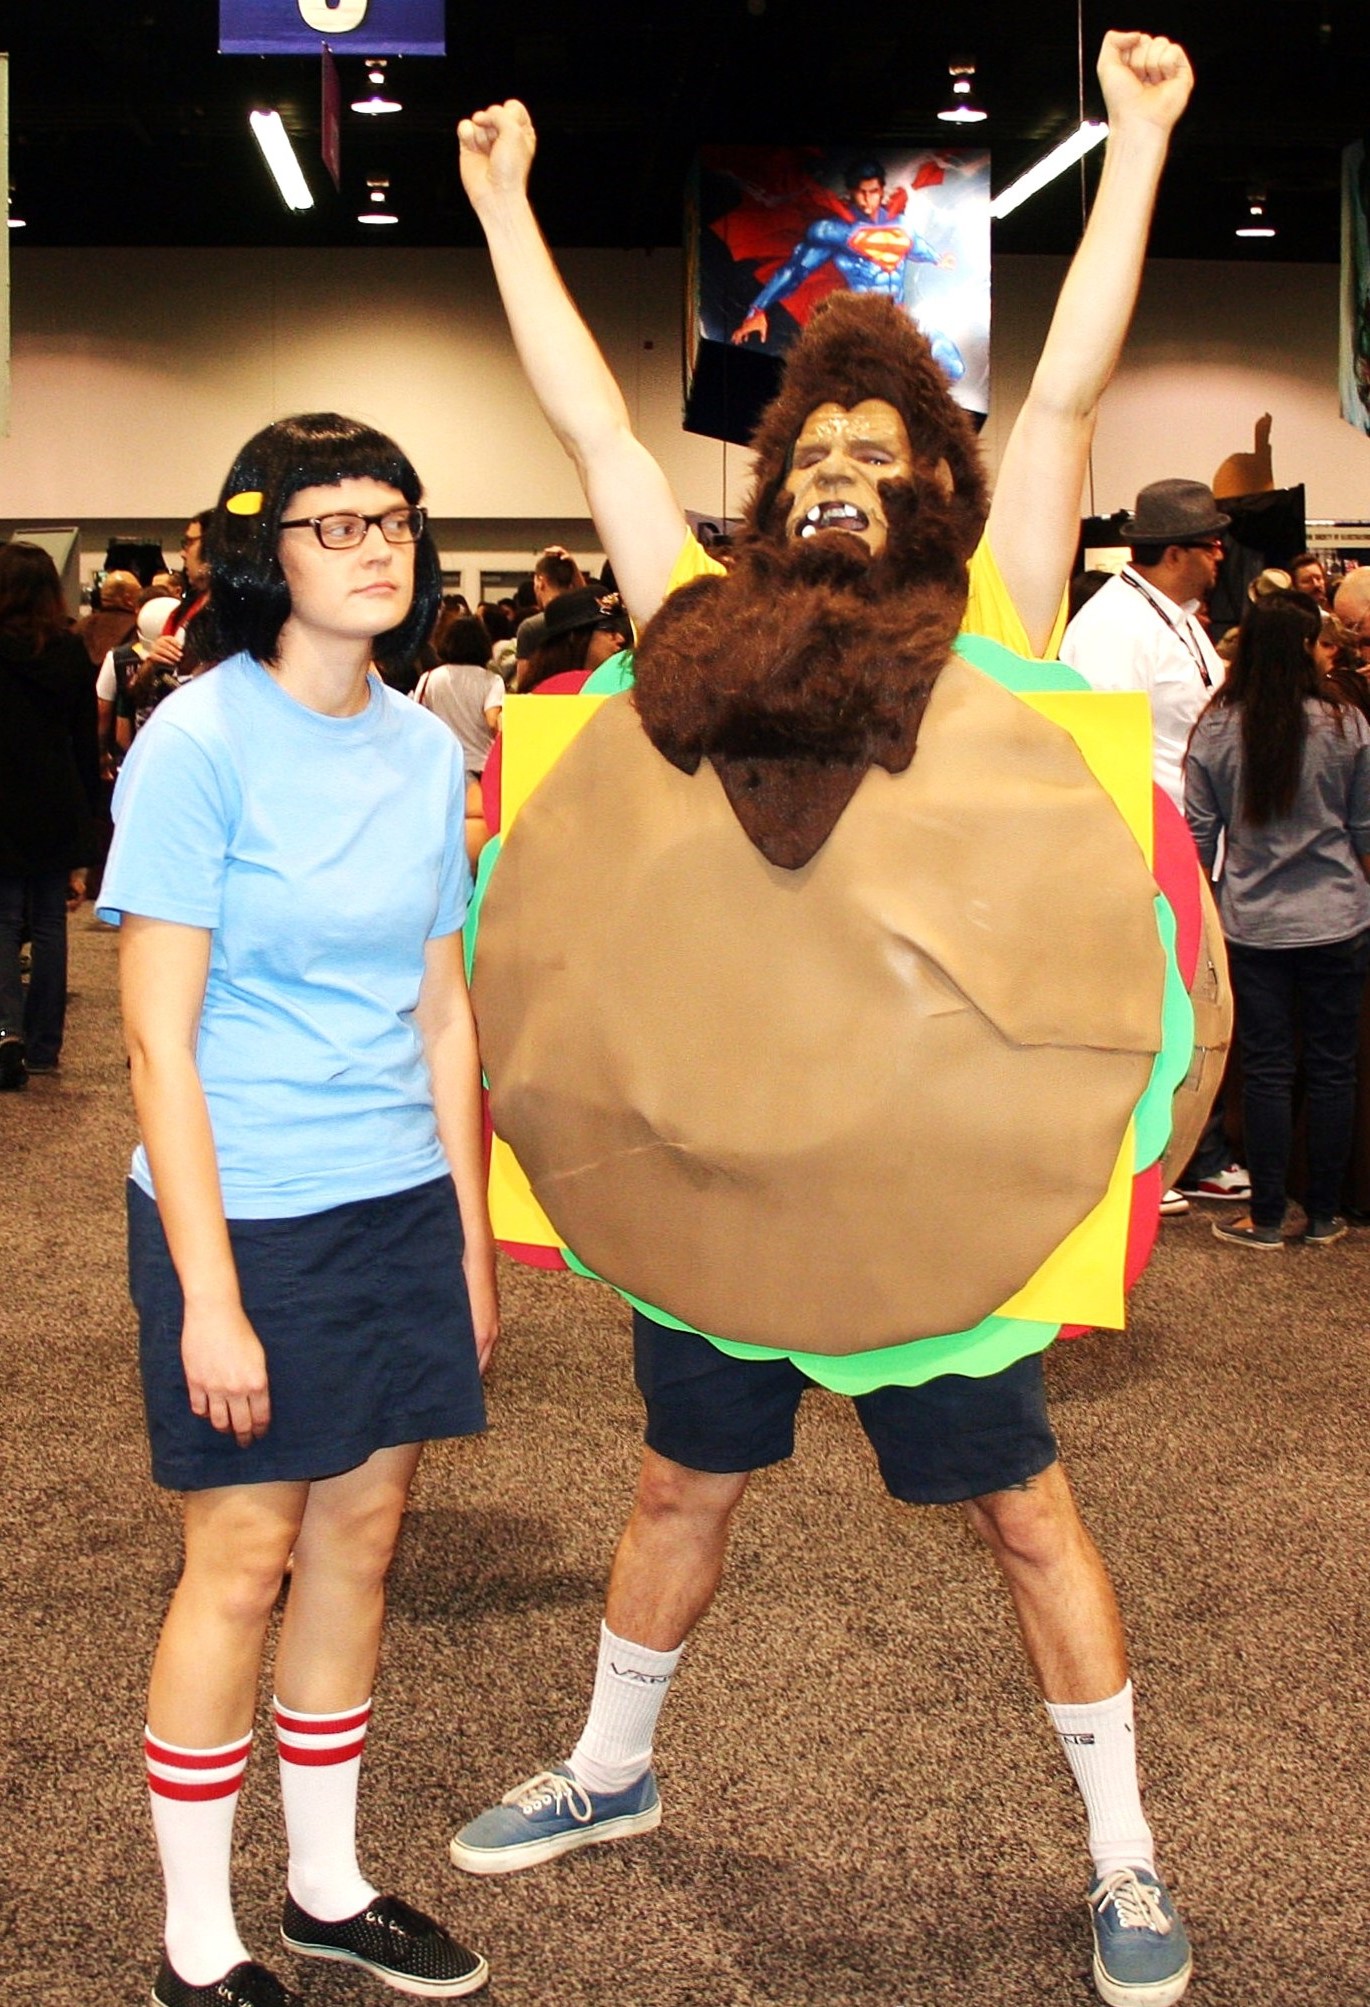 Beefsquatch! Bob's Burgers cosplay at WonderCon Anaheim: Tina and Gene Belcher. Photo: Twisted Pair Photography